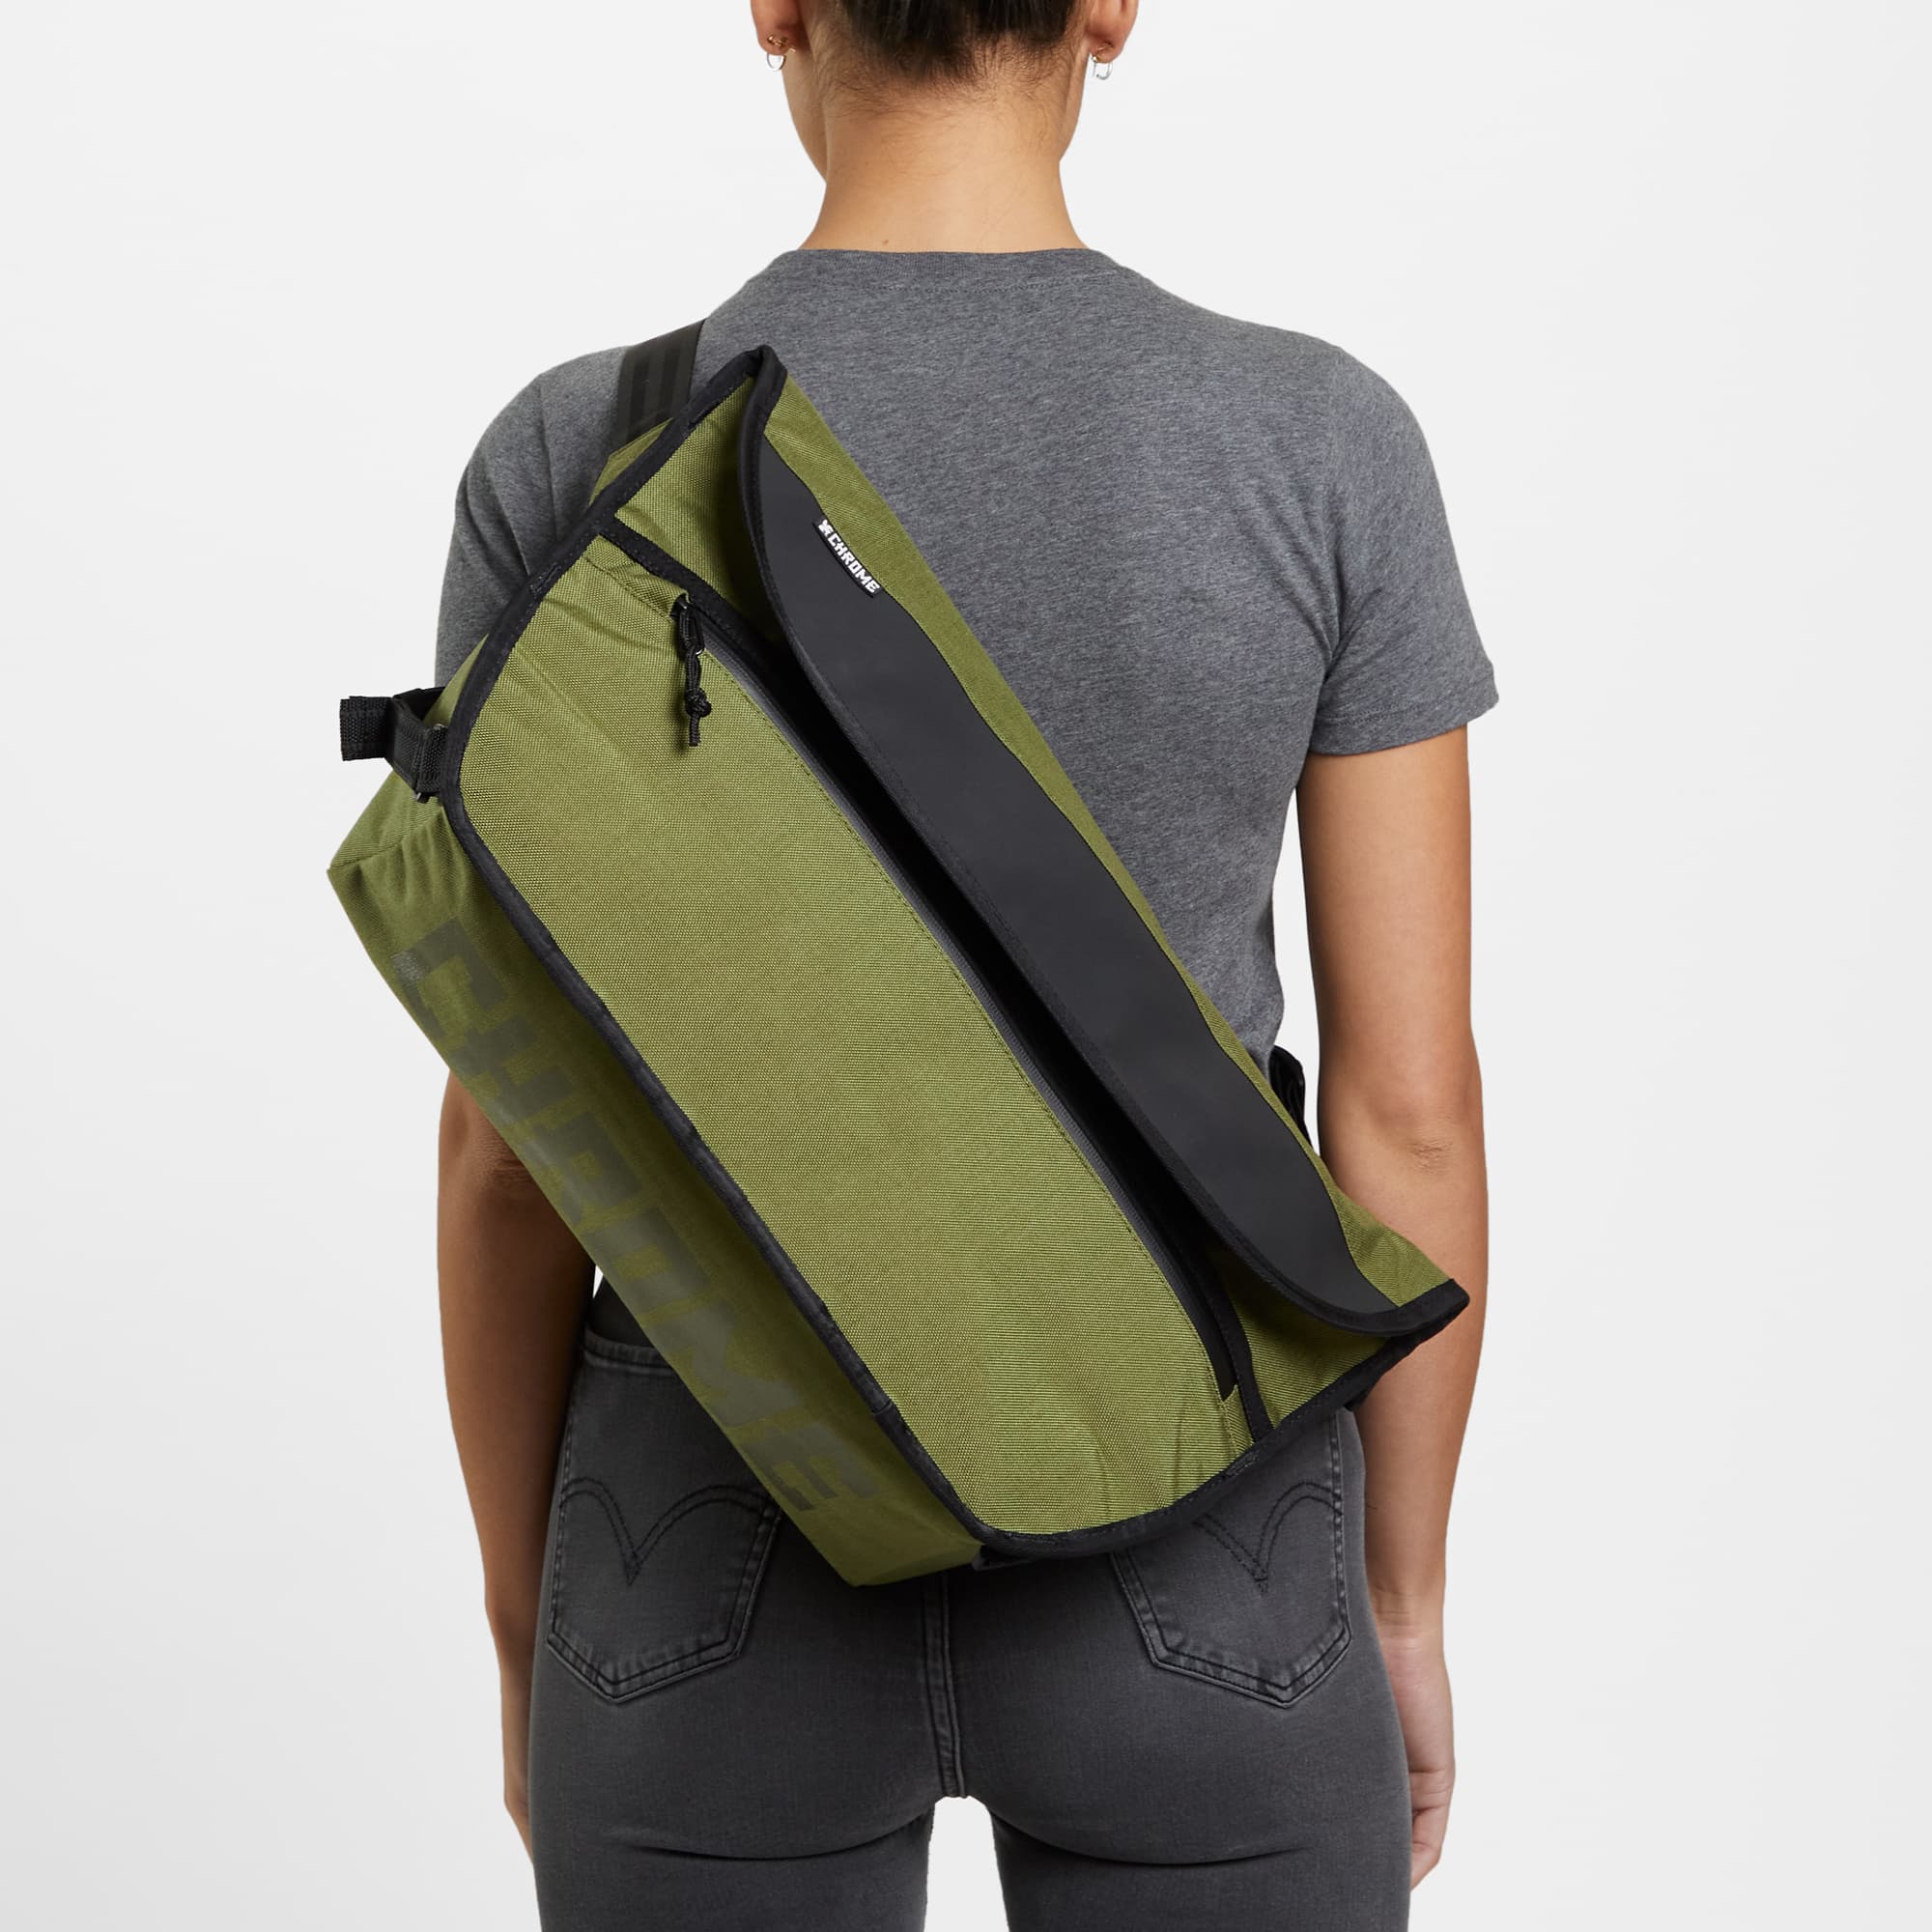 Simple Messenger 15L in green worn by a woman